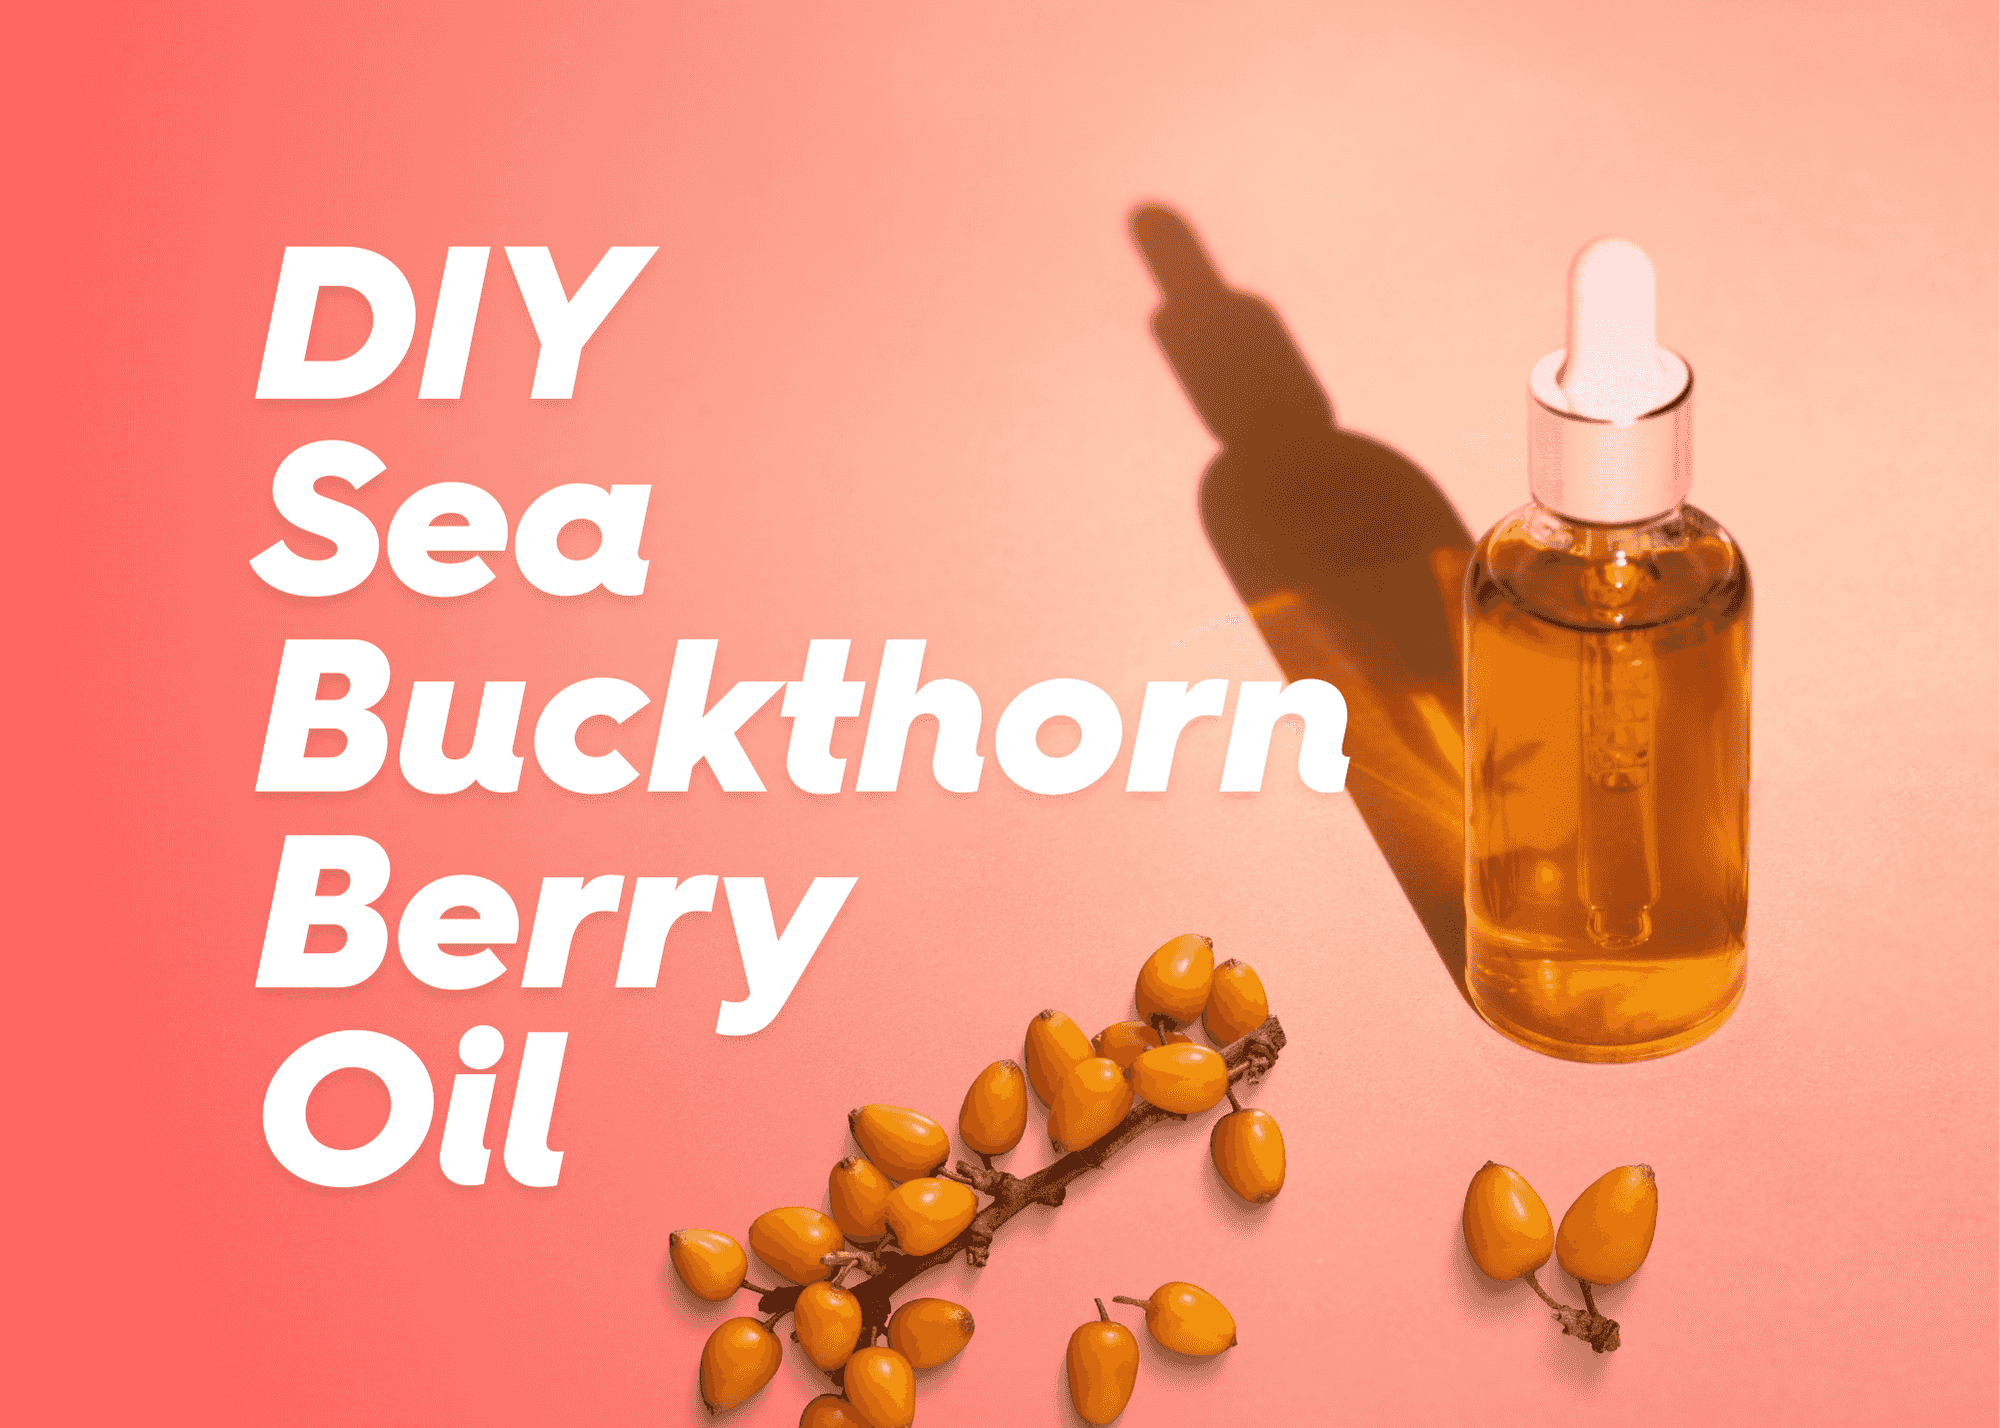 How to Make a DIY Sea Buckthorn Berry Oil